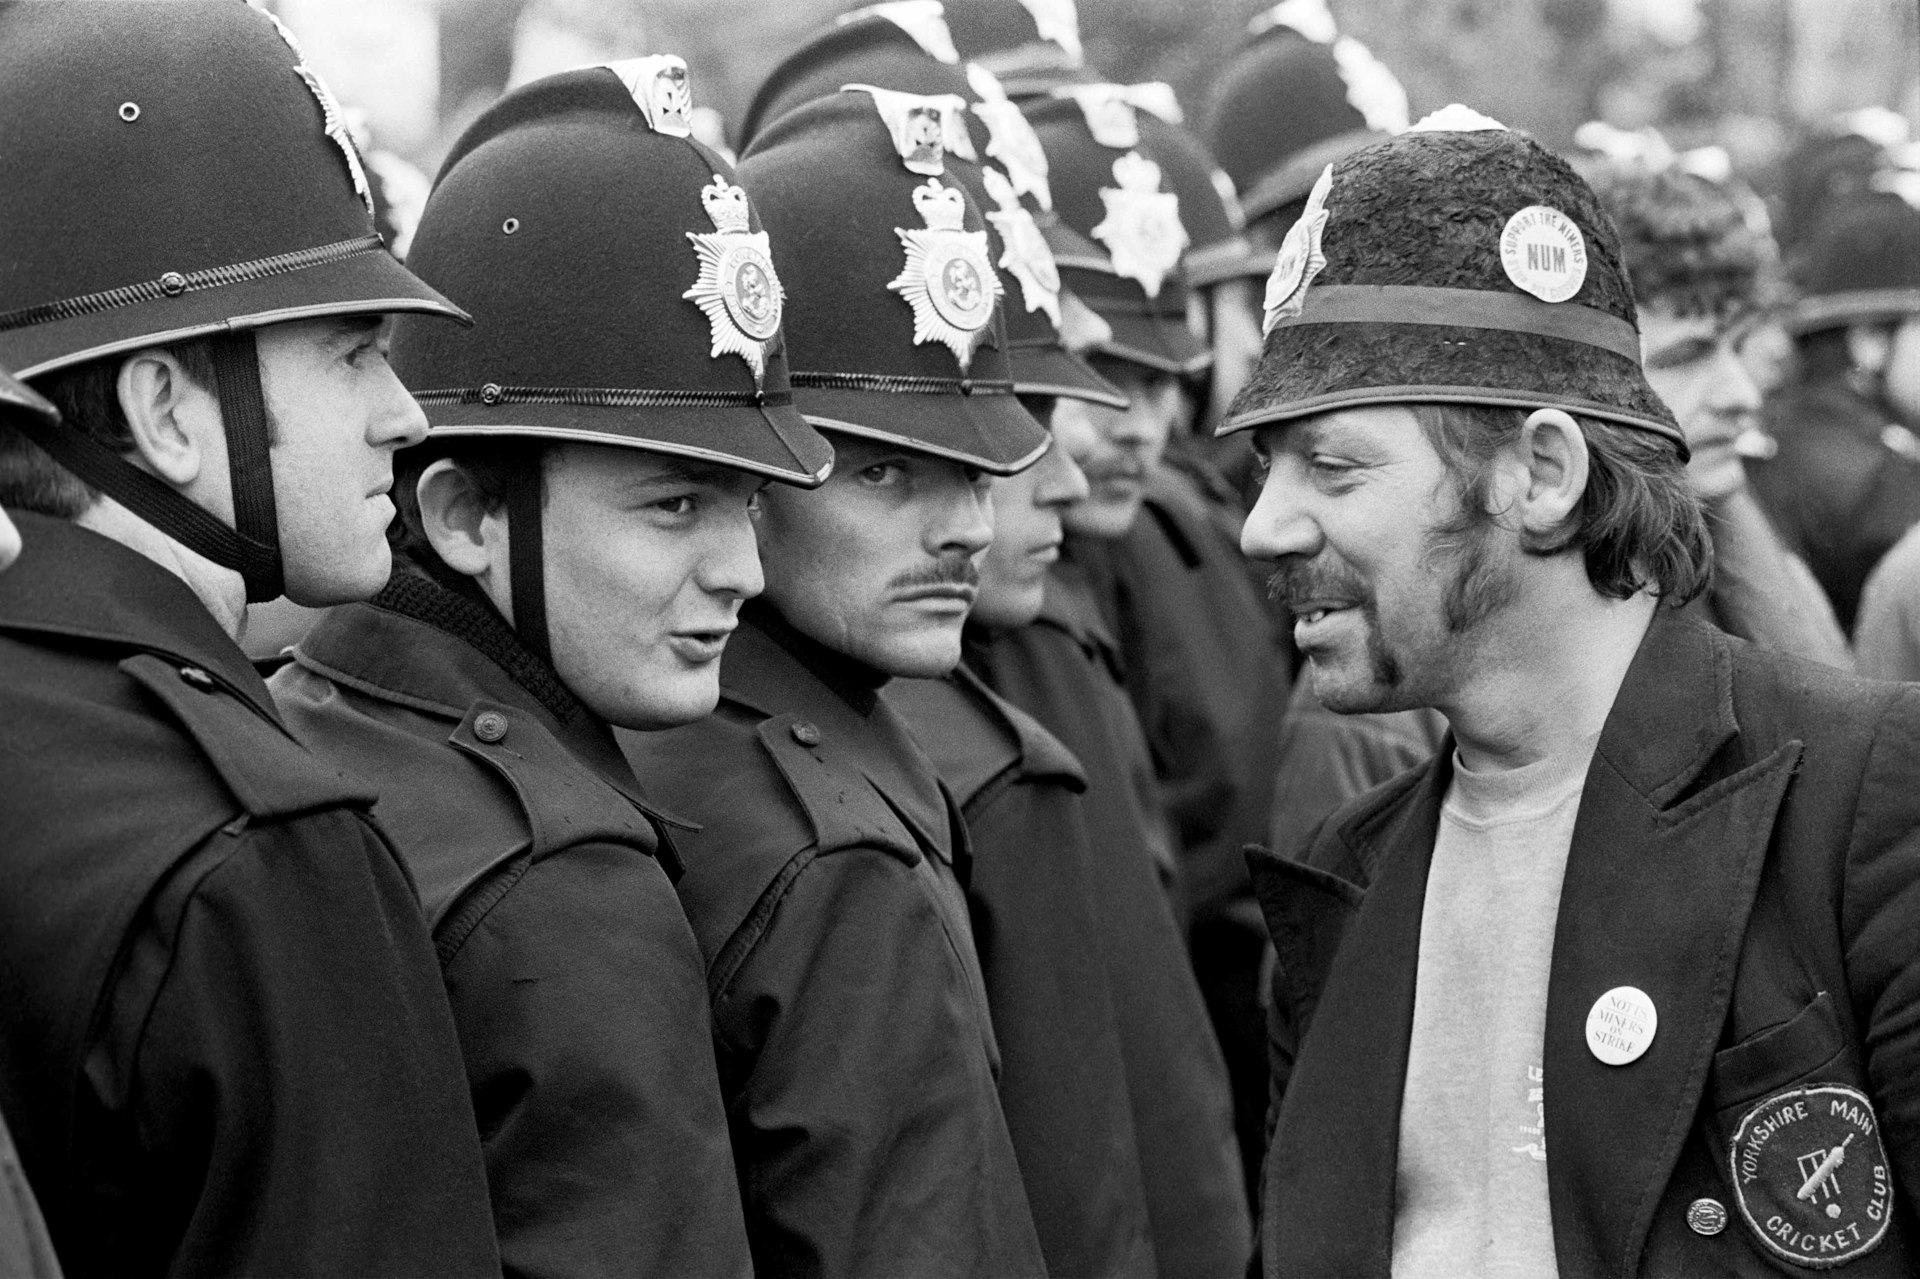 A visual history of activism in the North